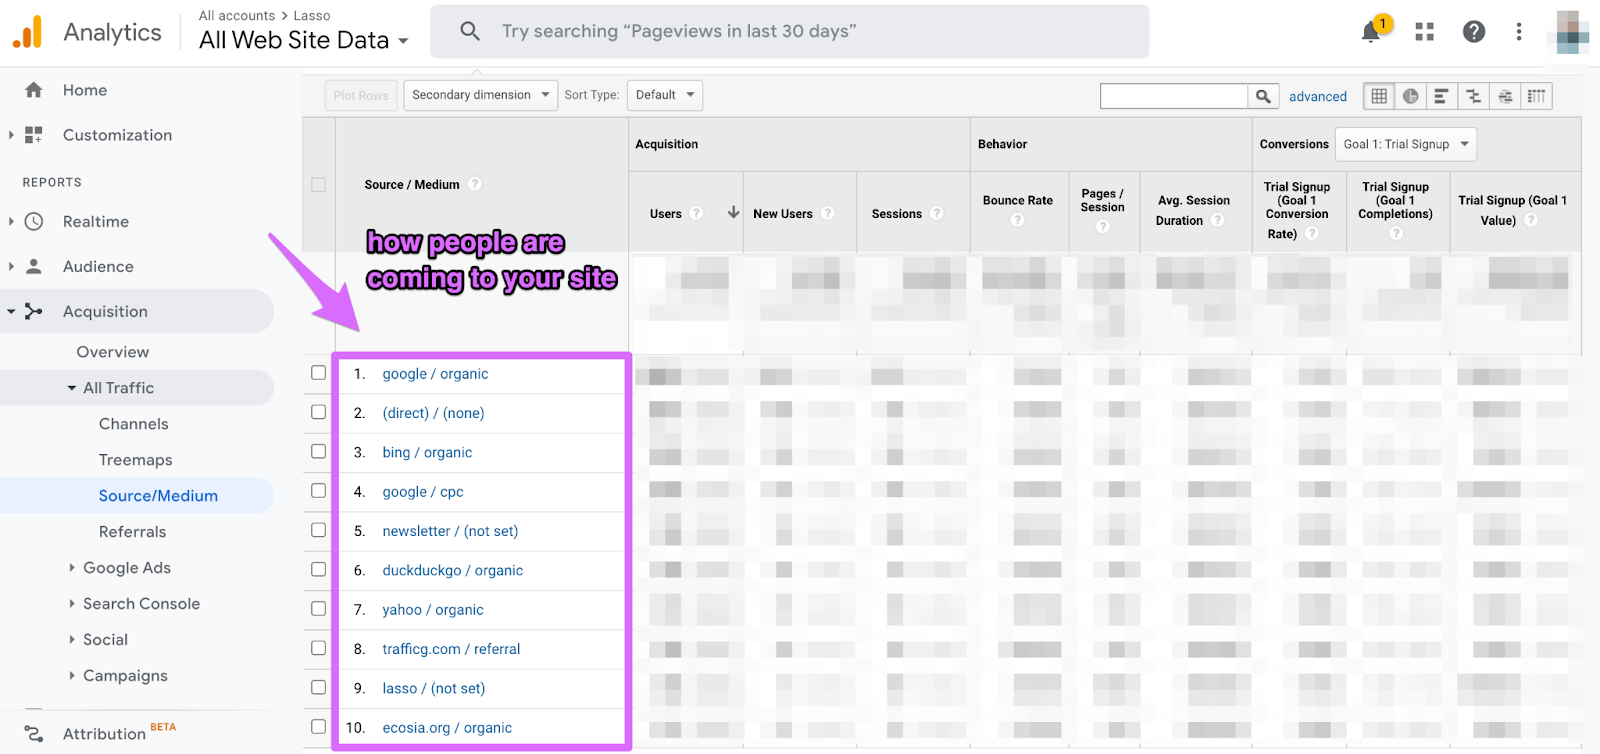 google analytics in source medium showing you your site's traffic sources